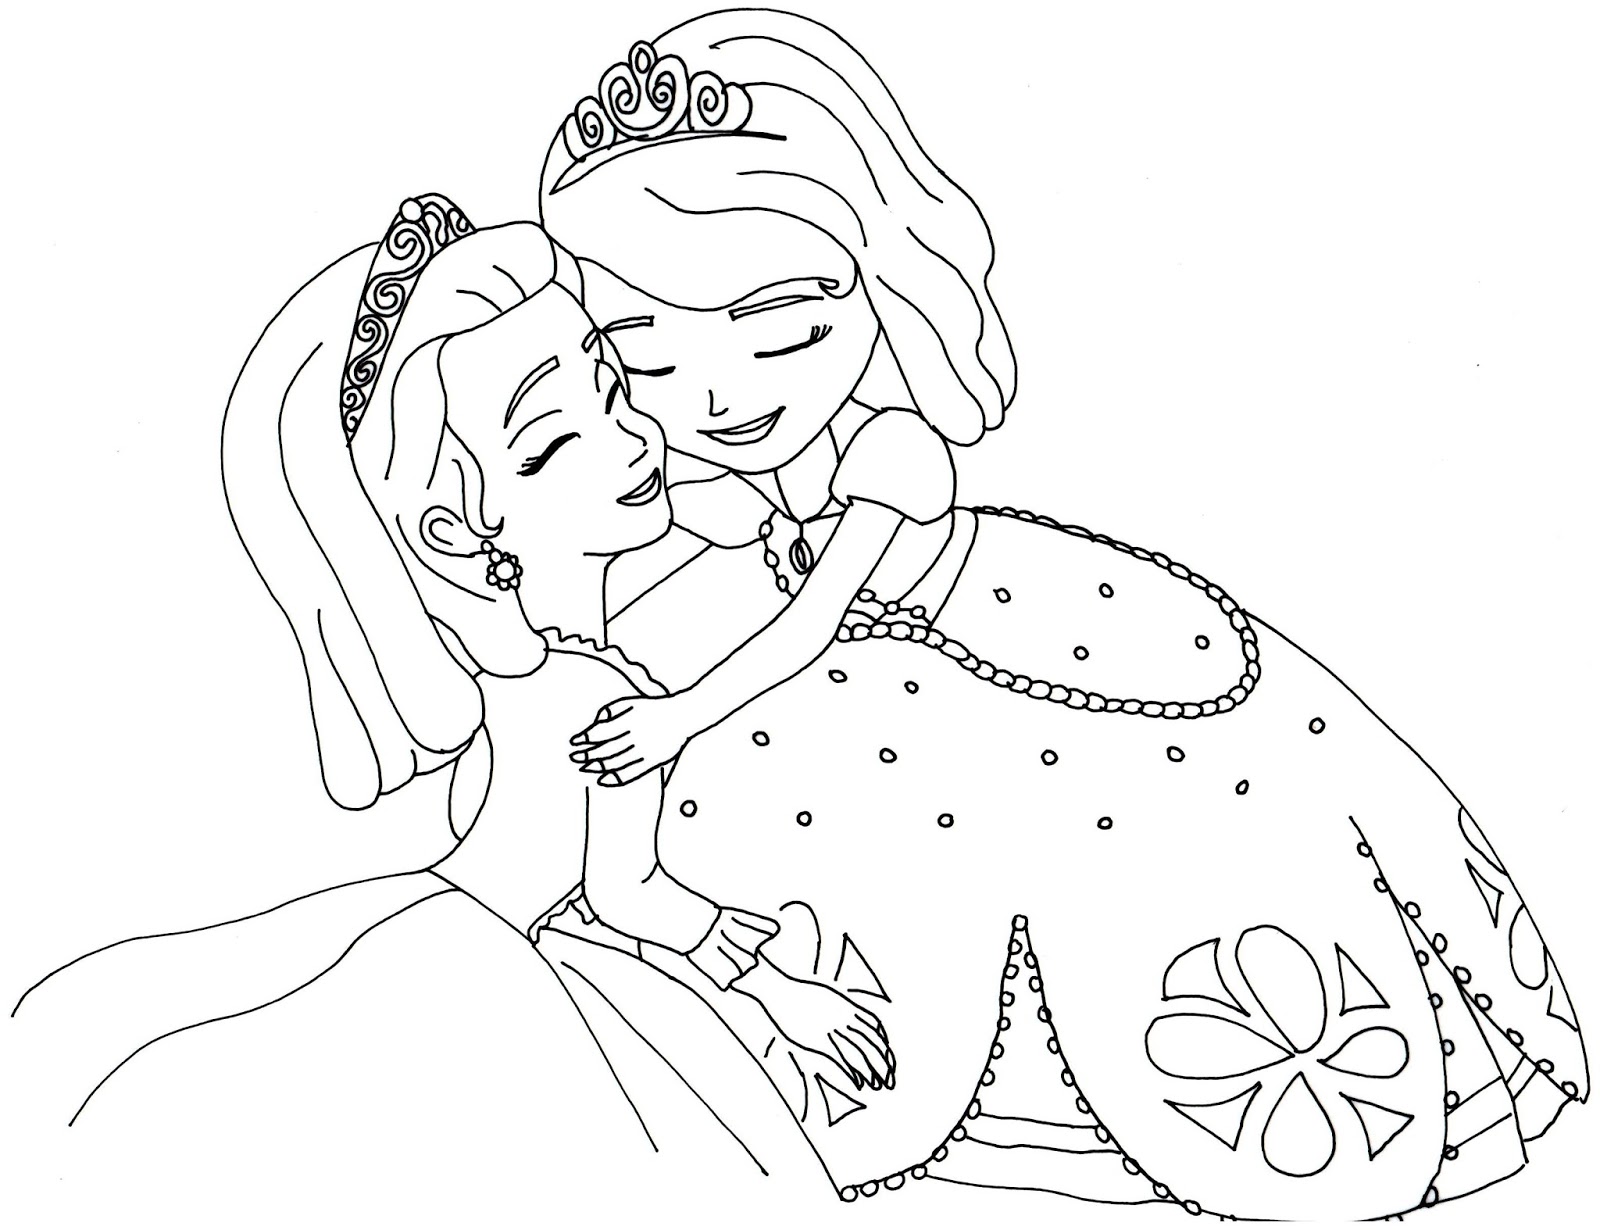 Sofia The First Coloring Pages Sofia And Amber Hugged Coloring Wallpapers Download Free Images Wallpaper [coloring365.blogspot.com]